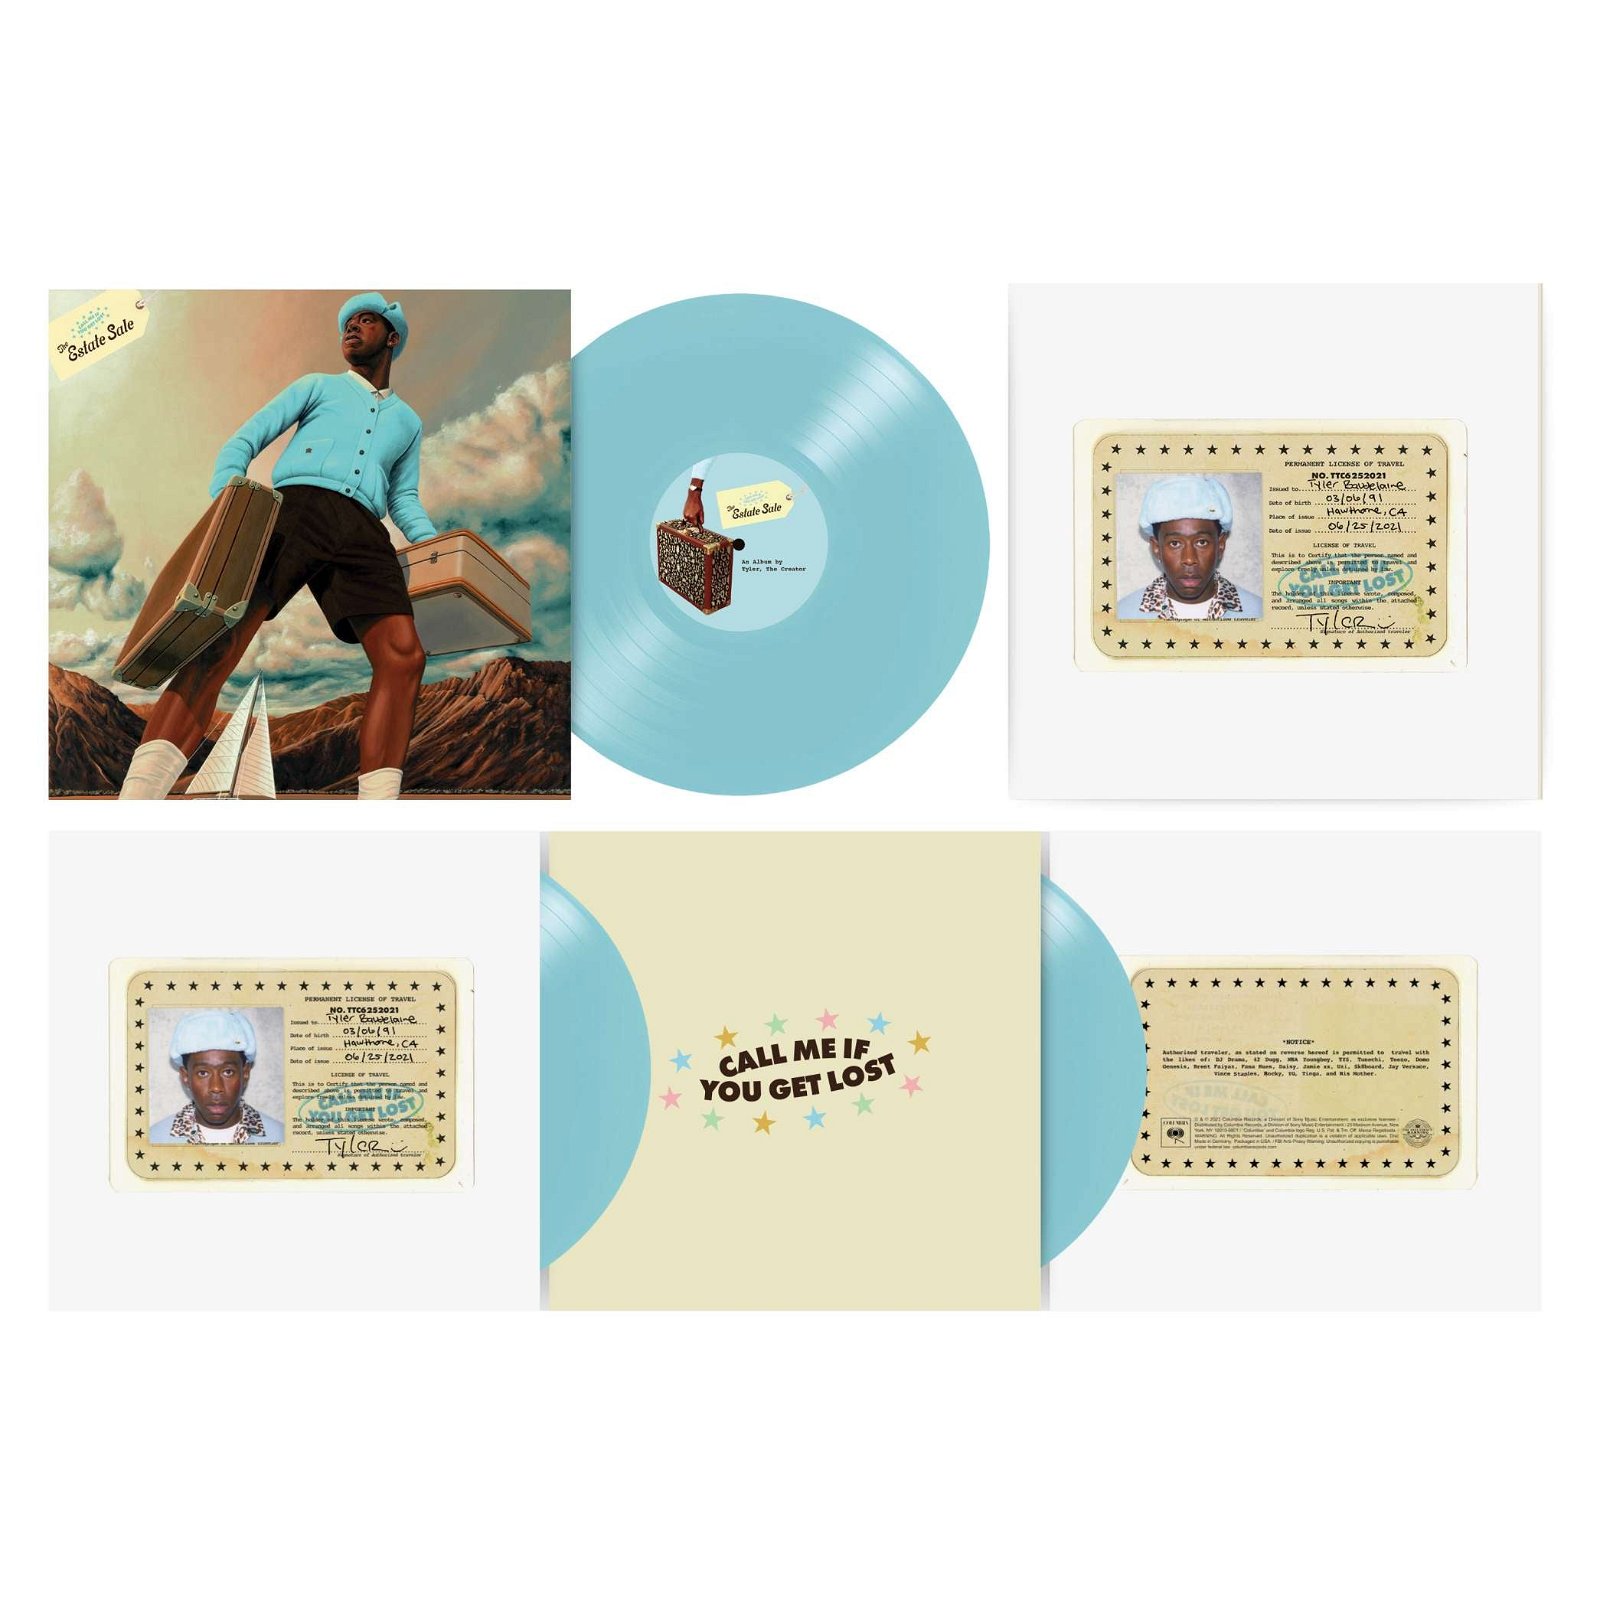 CD Shop - TYLER, THE CREATOR CALL ME IF YOU GET LOST: THE ESTATE SALE -LTD- / BLUE VINYL